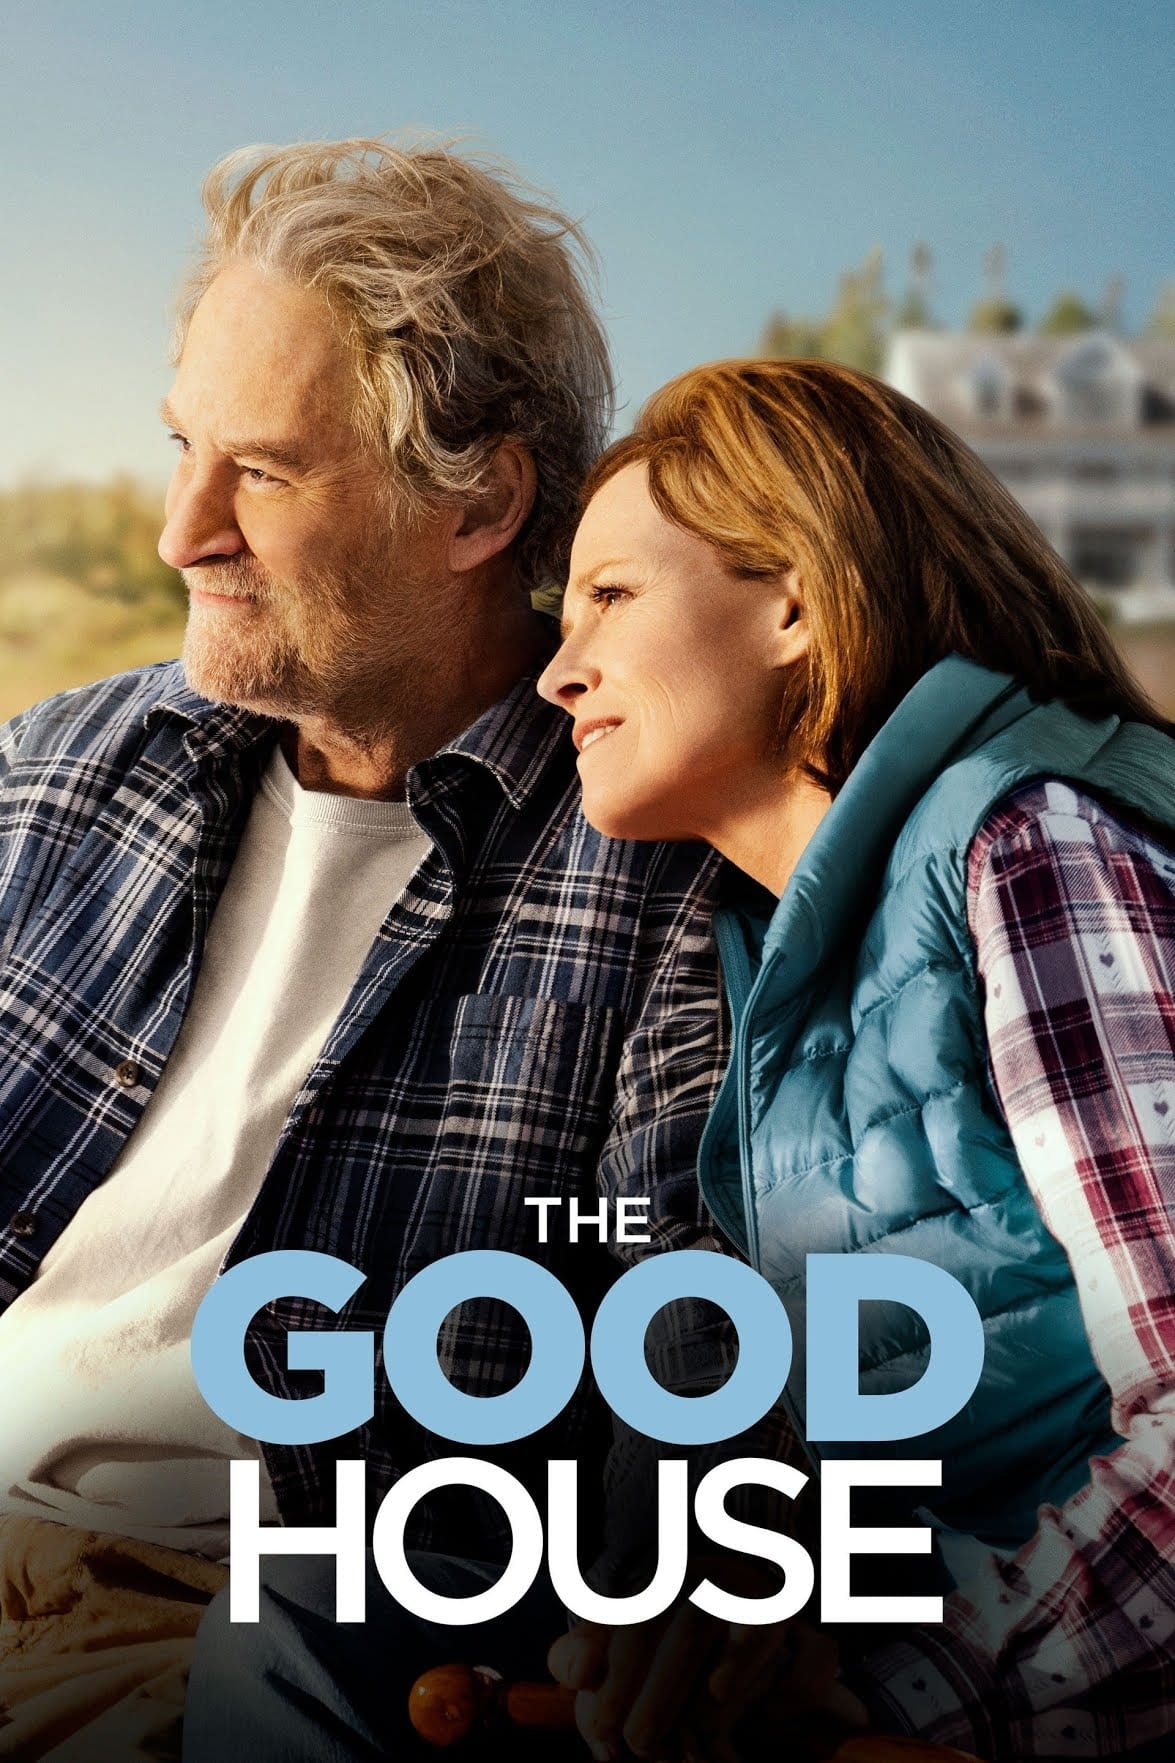 Poster for the movie "The Good House"